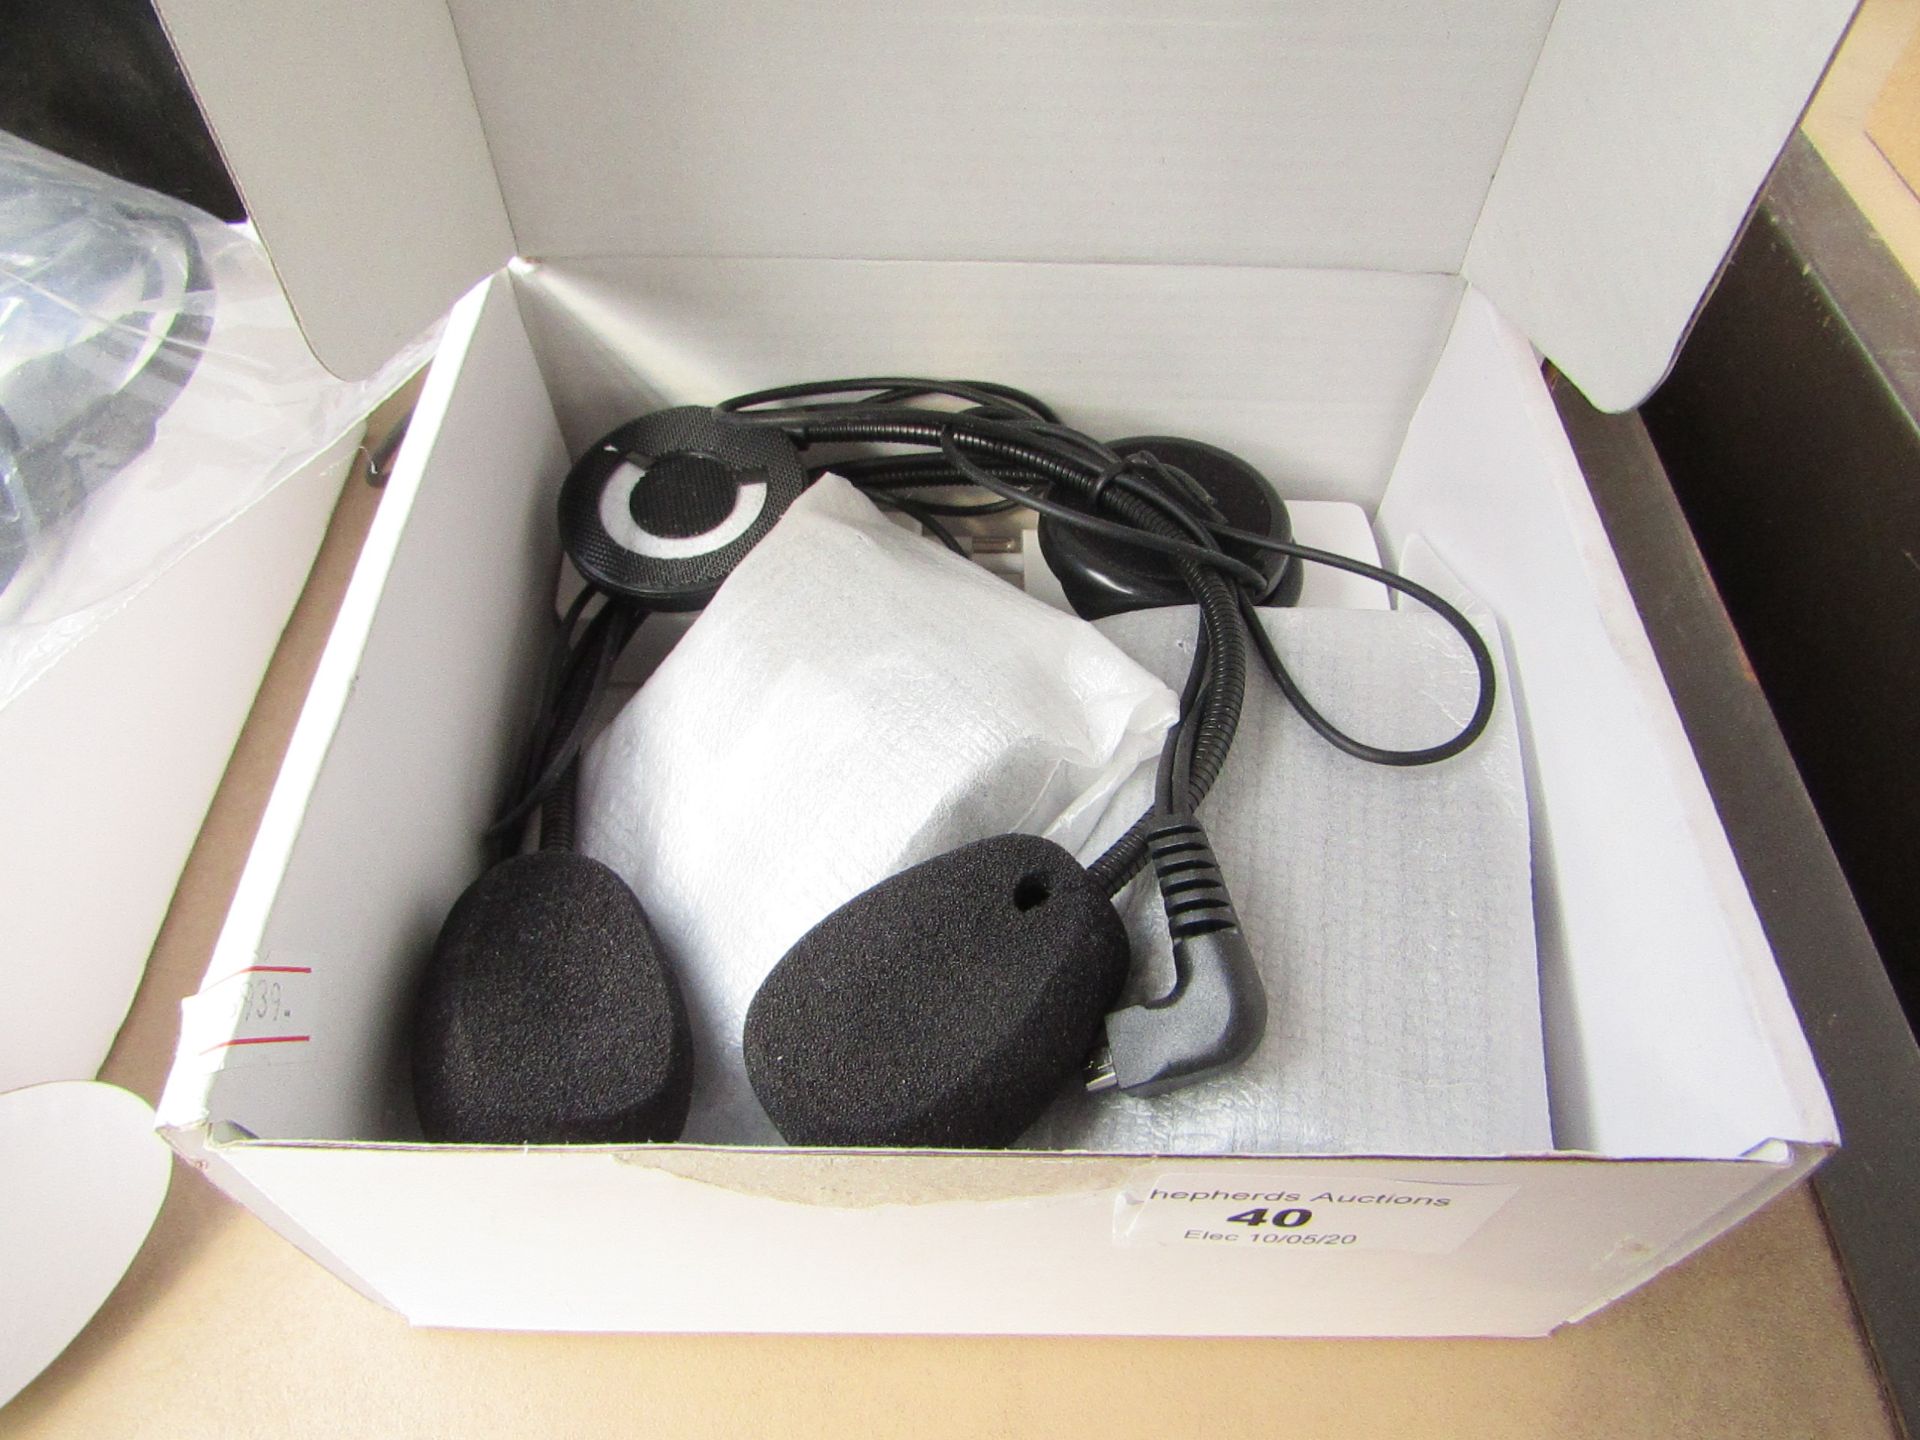 Buvee office headset, untested and boxed.